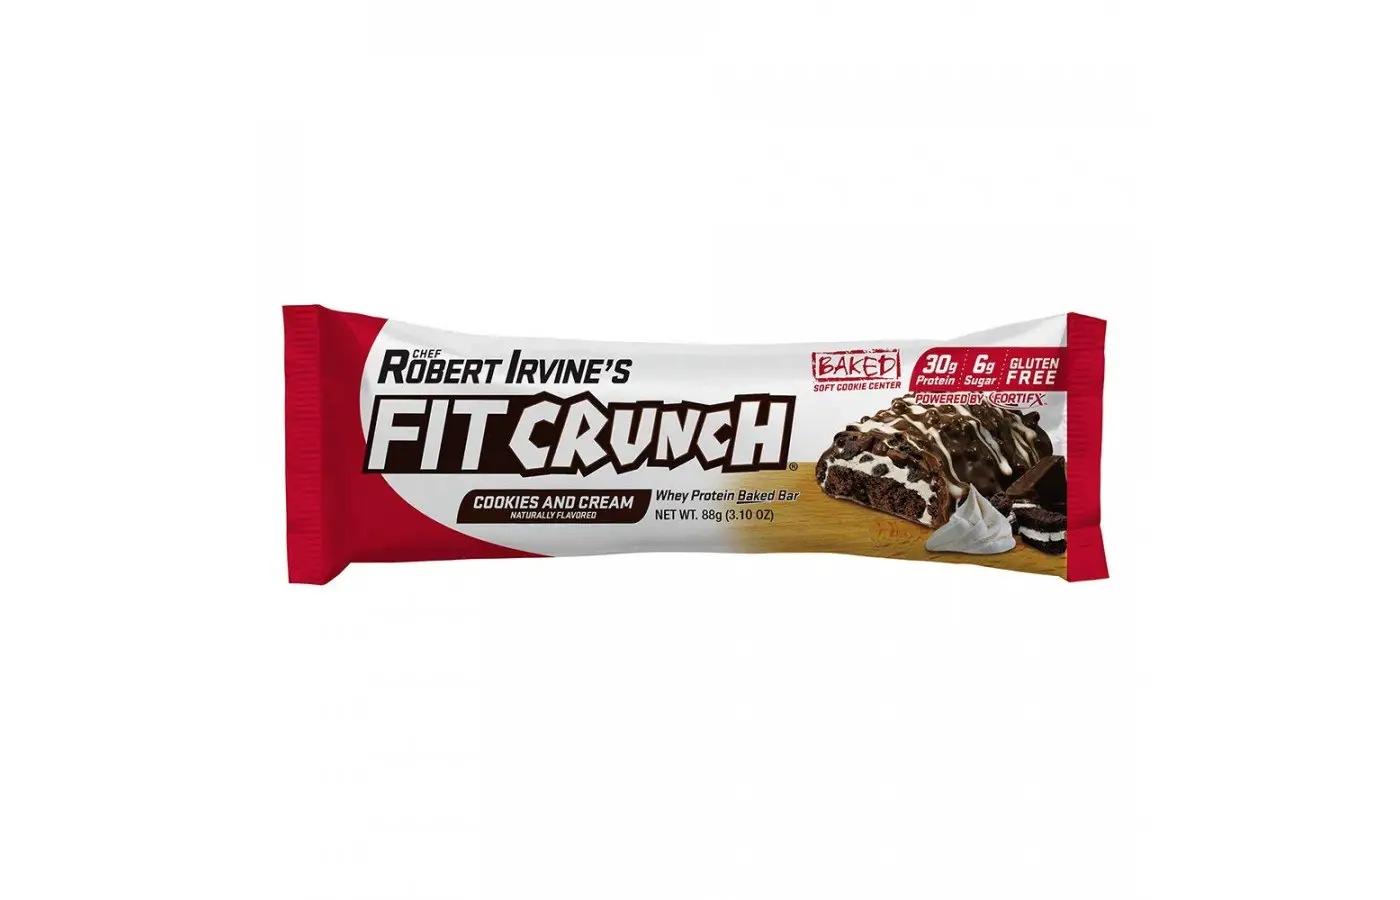 Fitcrunch single cookies and cream